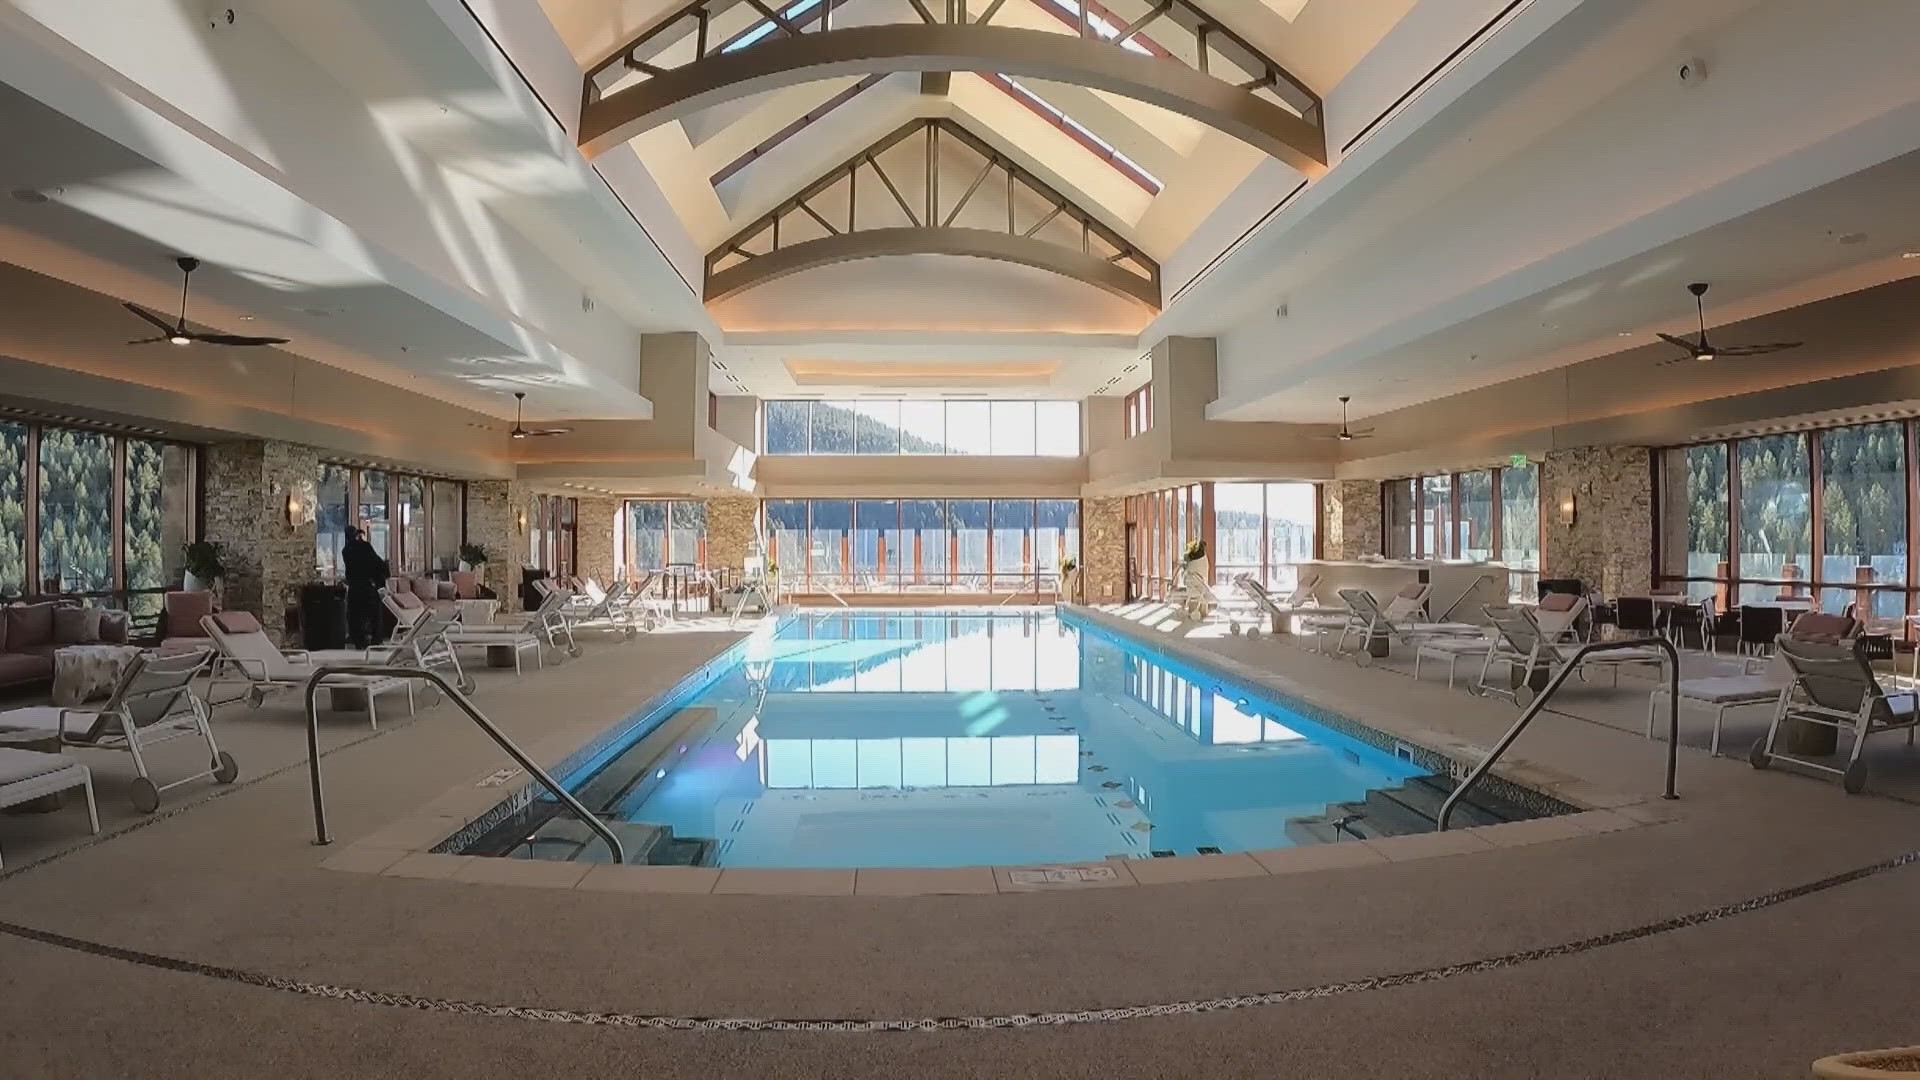 Spa Monarch in Black Hawk has been named the fourth best spa in the nation, according to a USA Today poll.